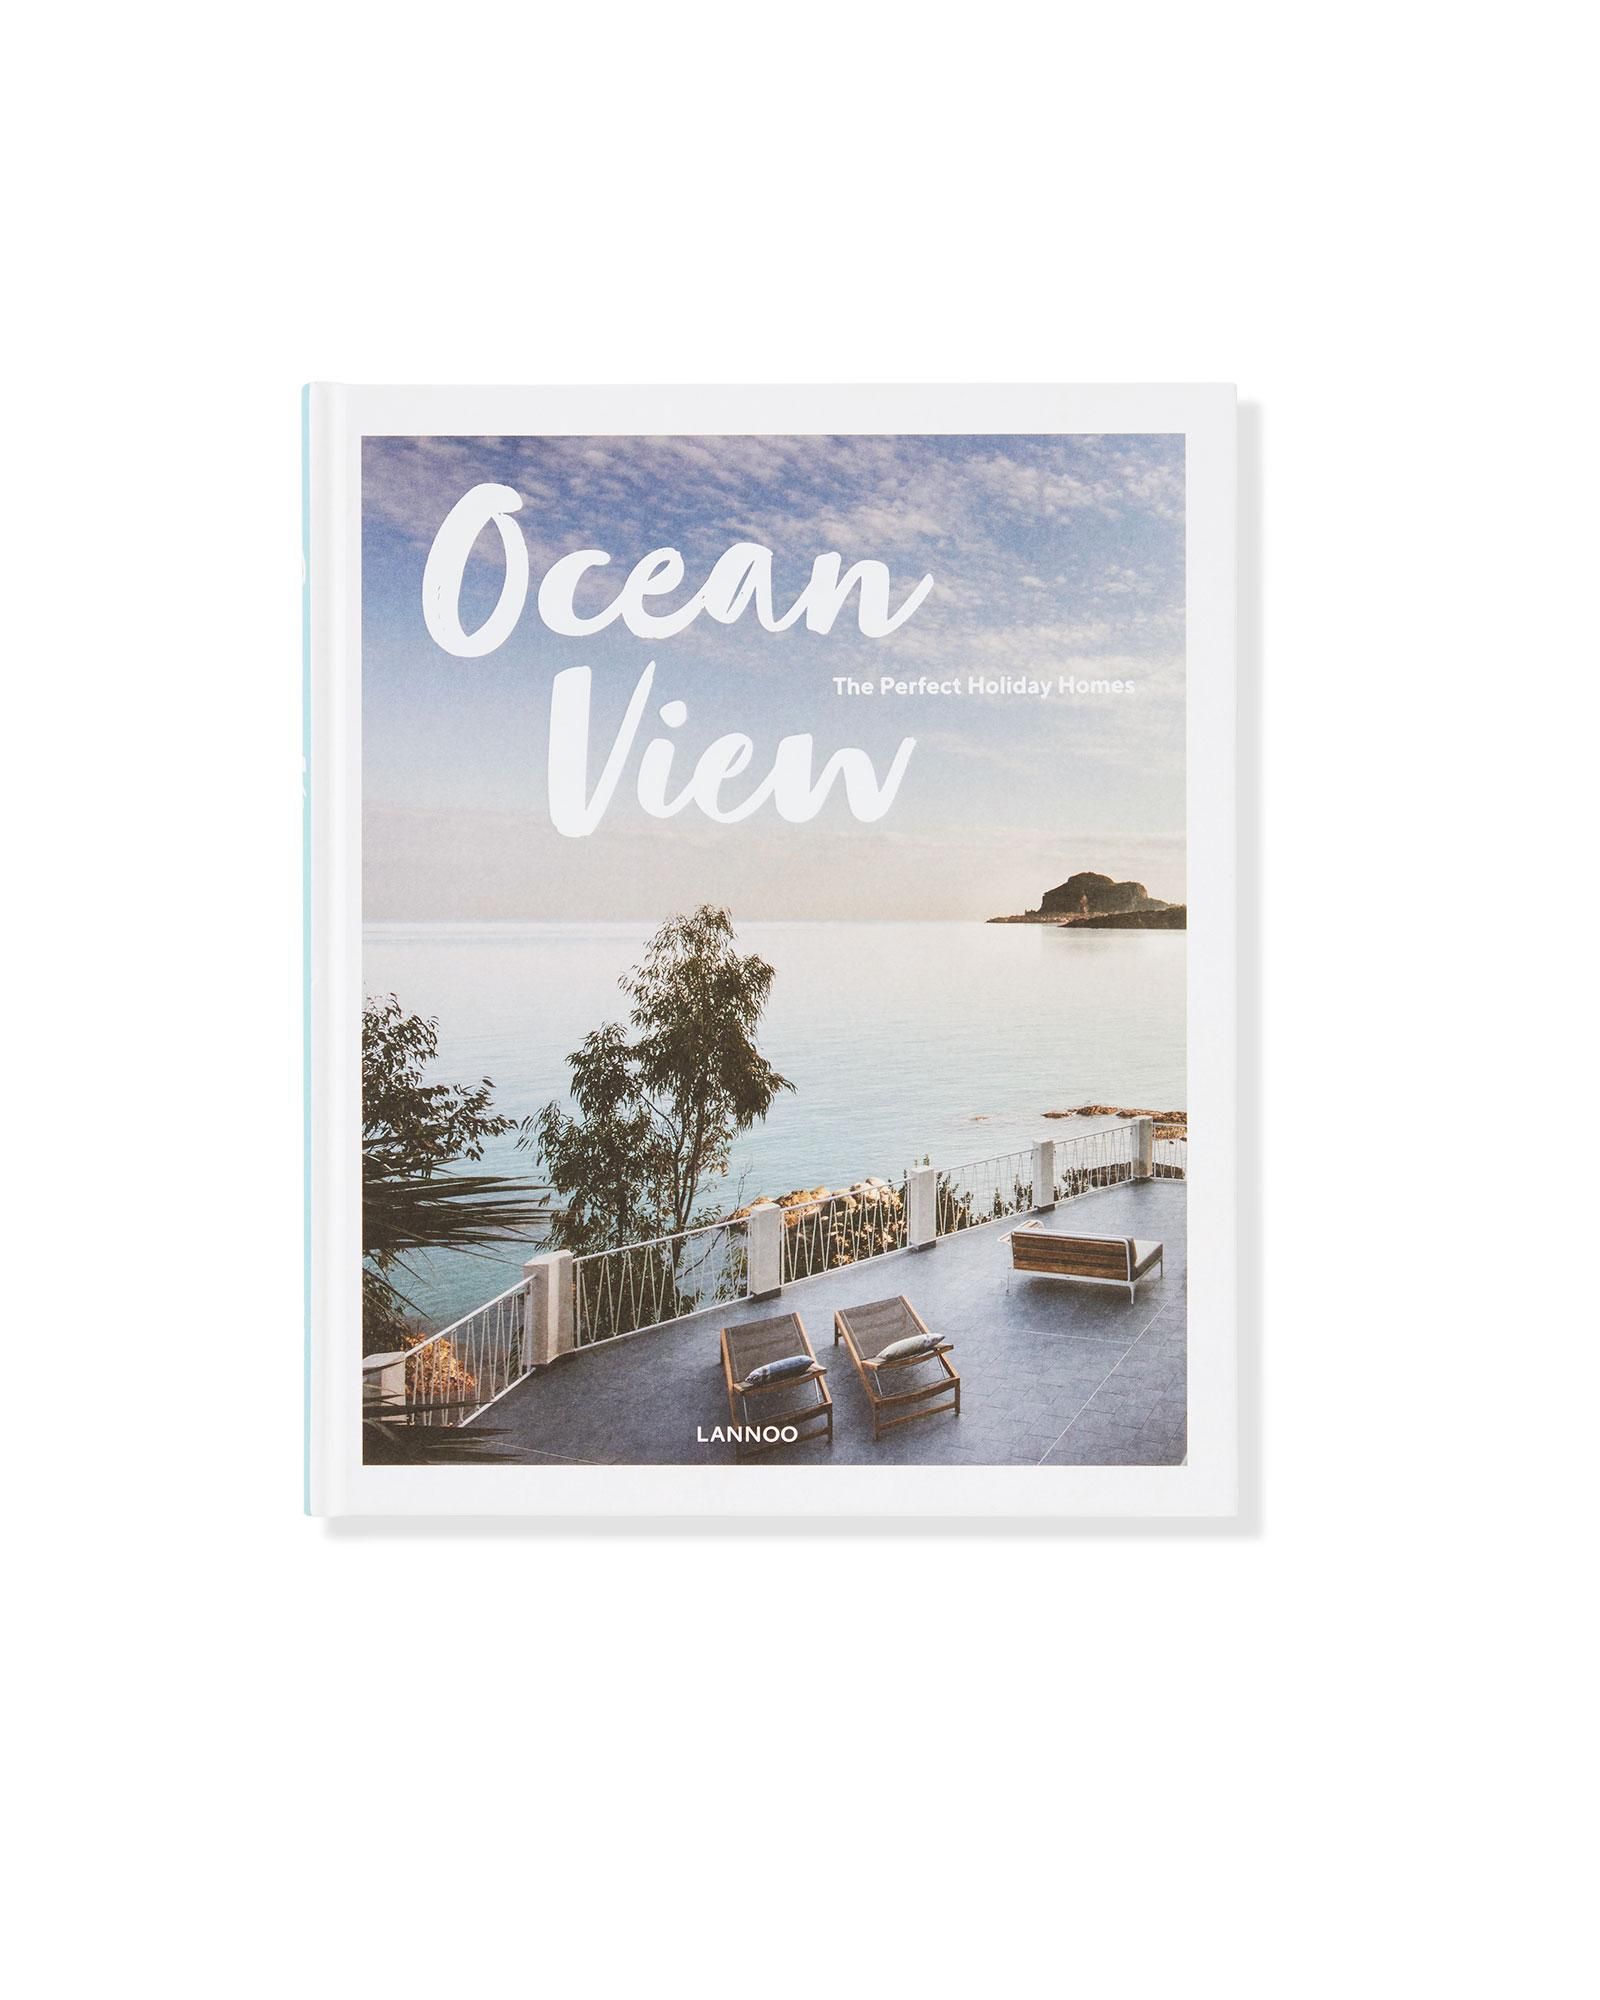 "Ocean View: The Perfect Holiday Homes" by Sebastiaan Bedaux | Serena and Lily